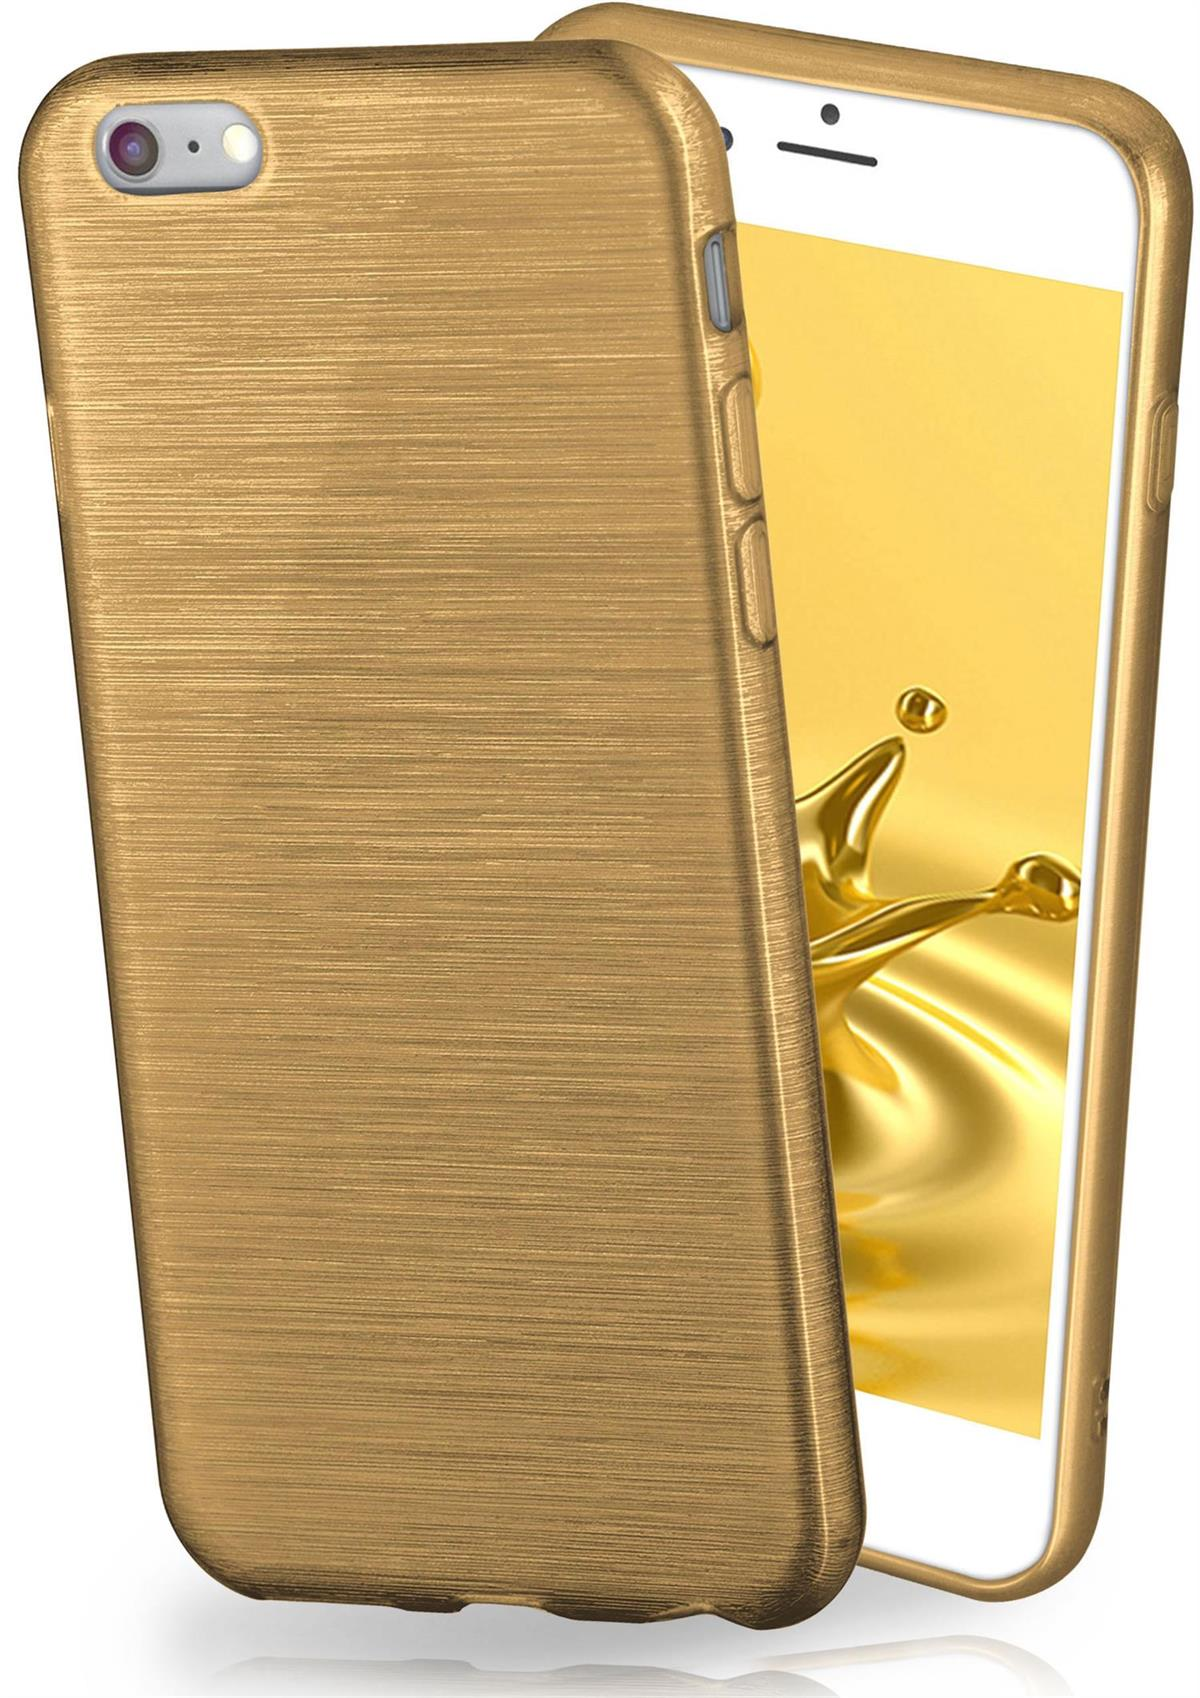 iPhone Plus, MOEX 6 Case, Backcover, Apple, Ivory-Gold Brushed